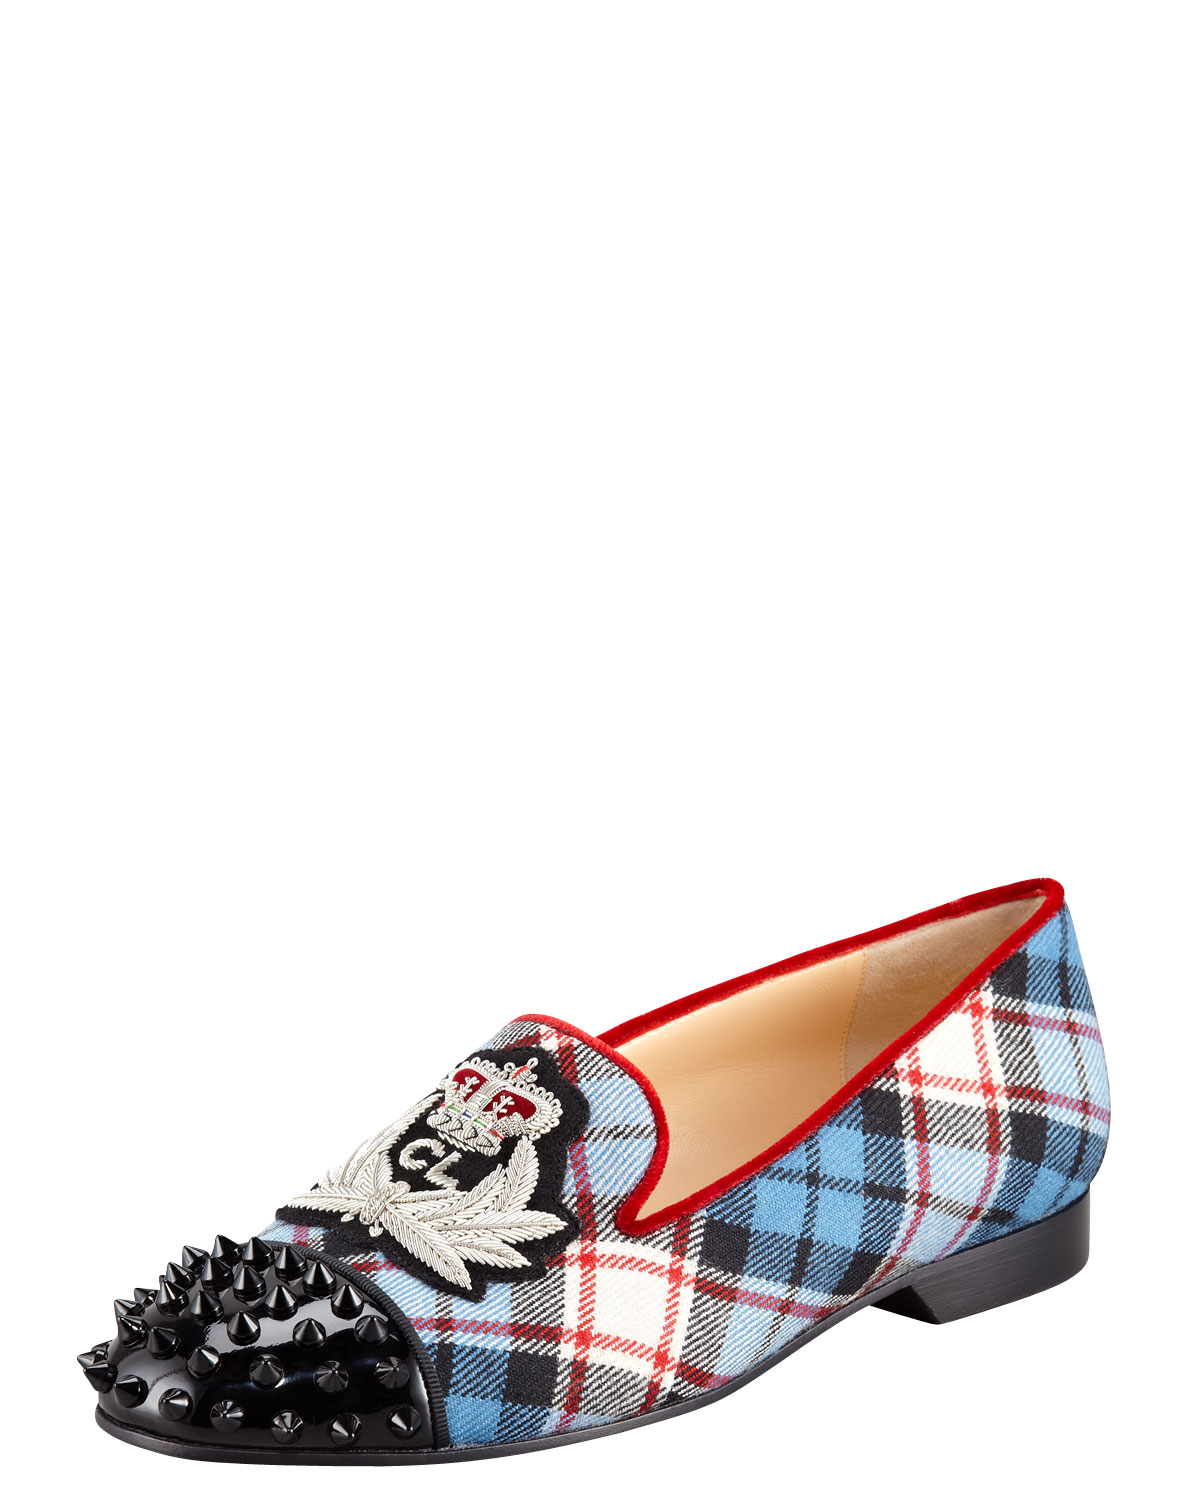 christian louboutin striped loafers Black and white spike studded ...